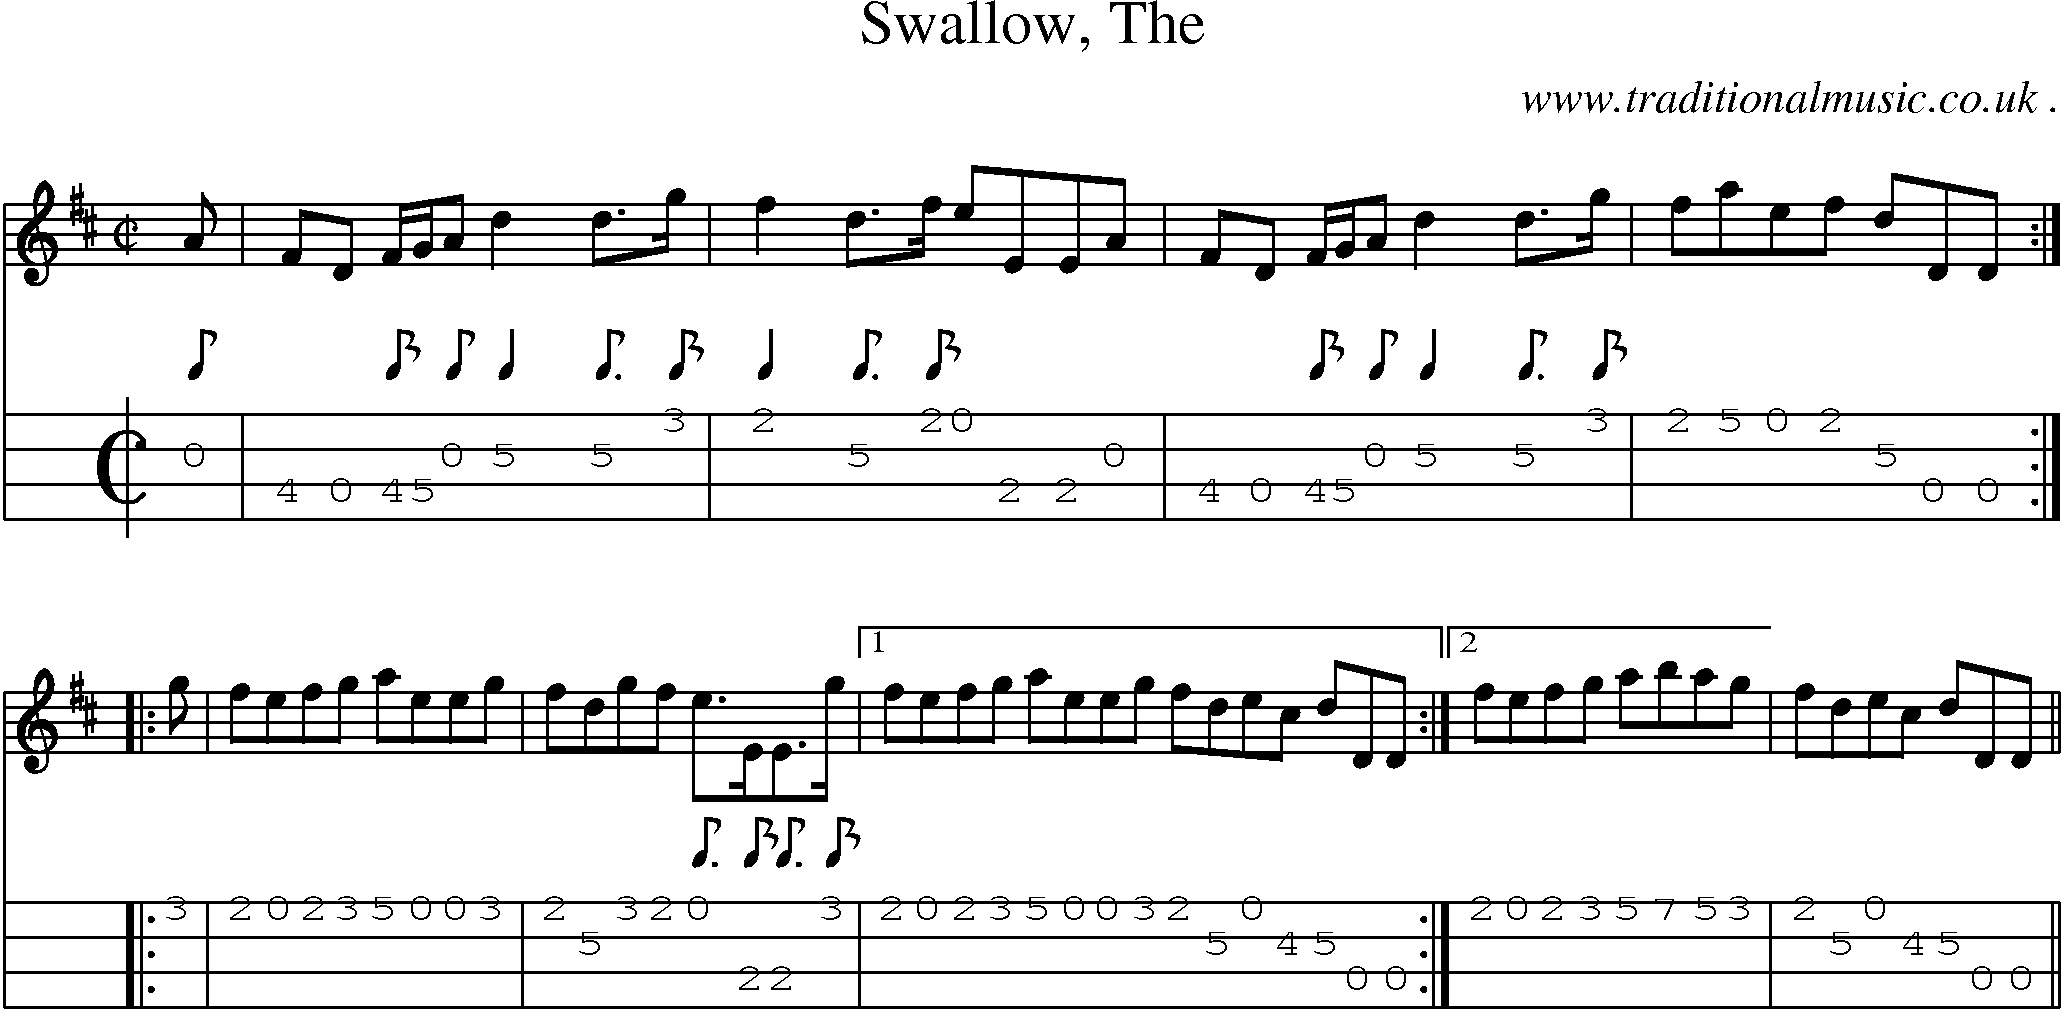 Sheet-music  score, Chords and Mandolin Tabs for Swallow The